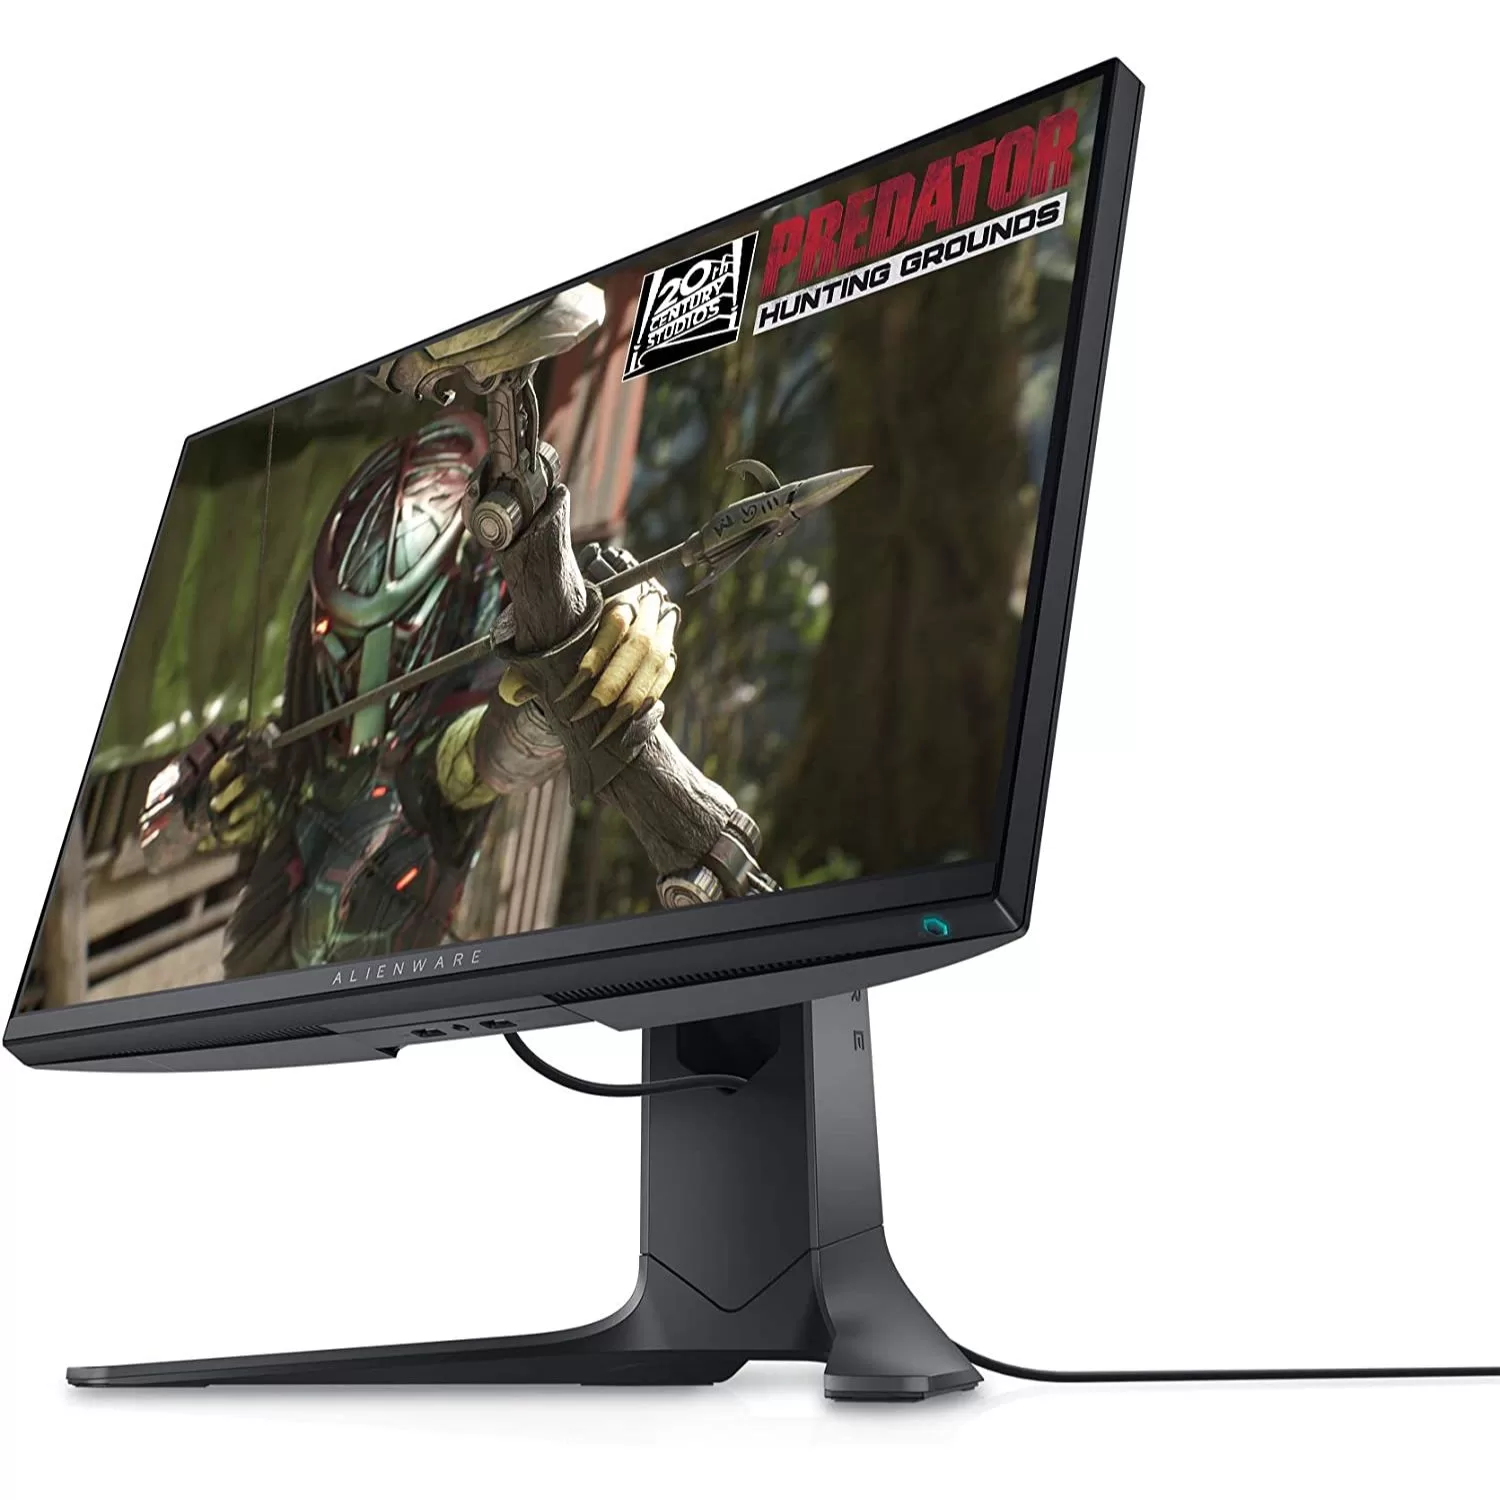 Alienware AW2521HFA, 24.5-inch FHD IPS Monitor with AMD FreeSync, 240Hz LCD 11